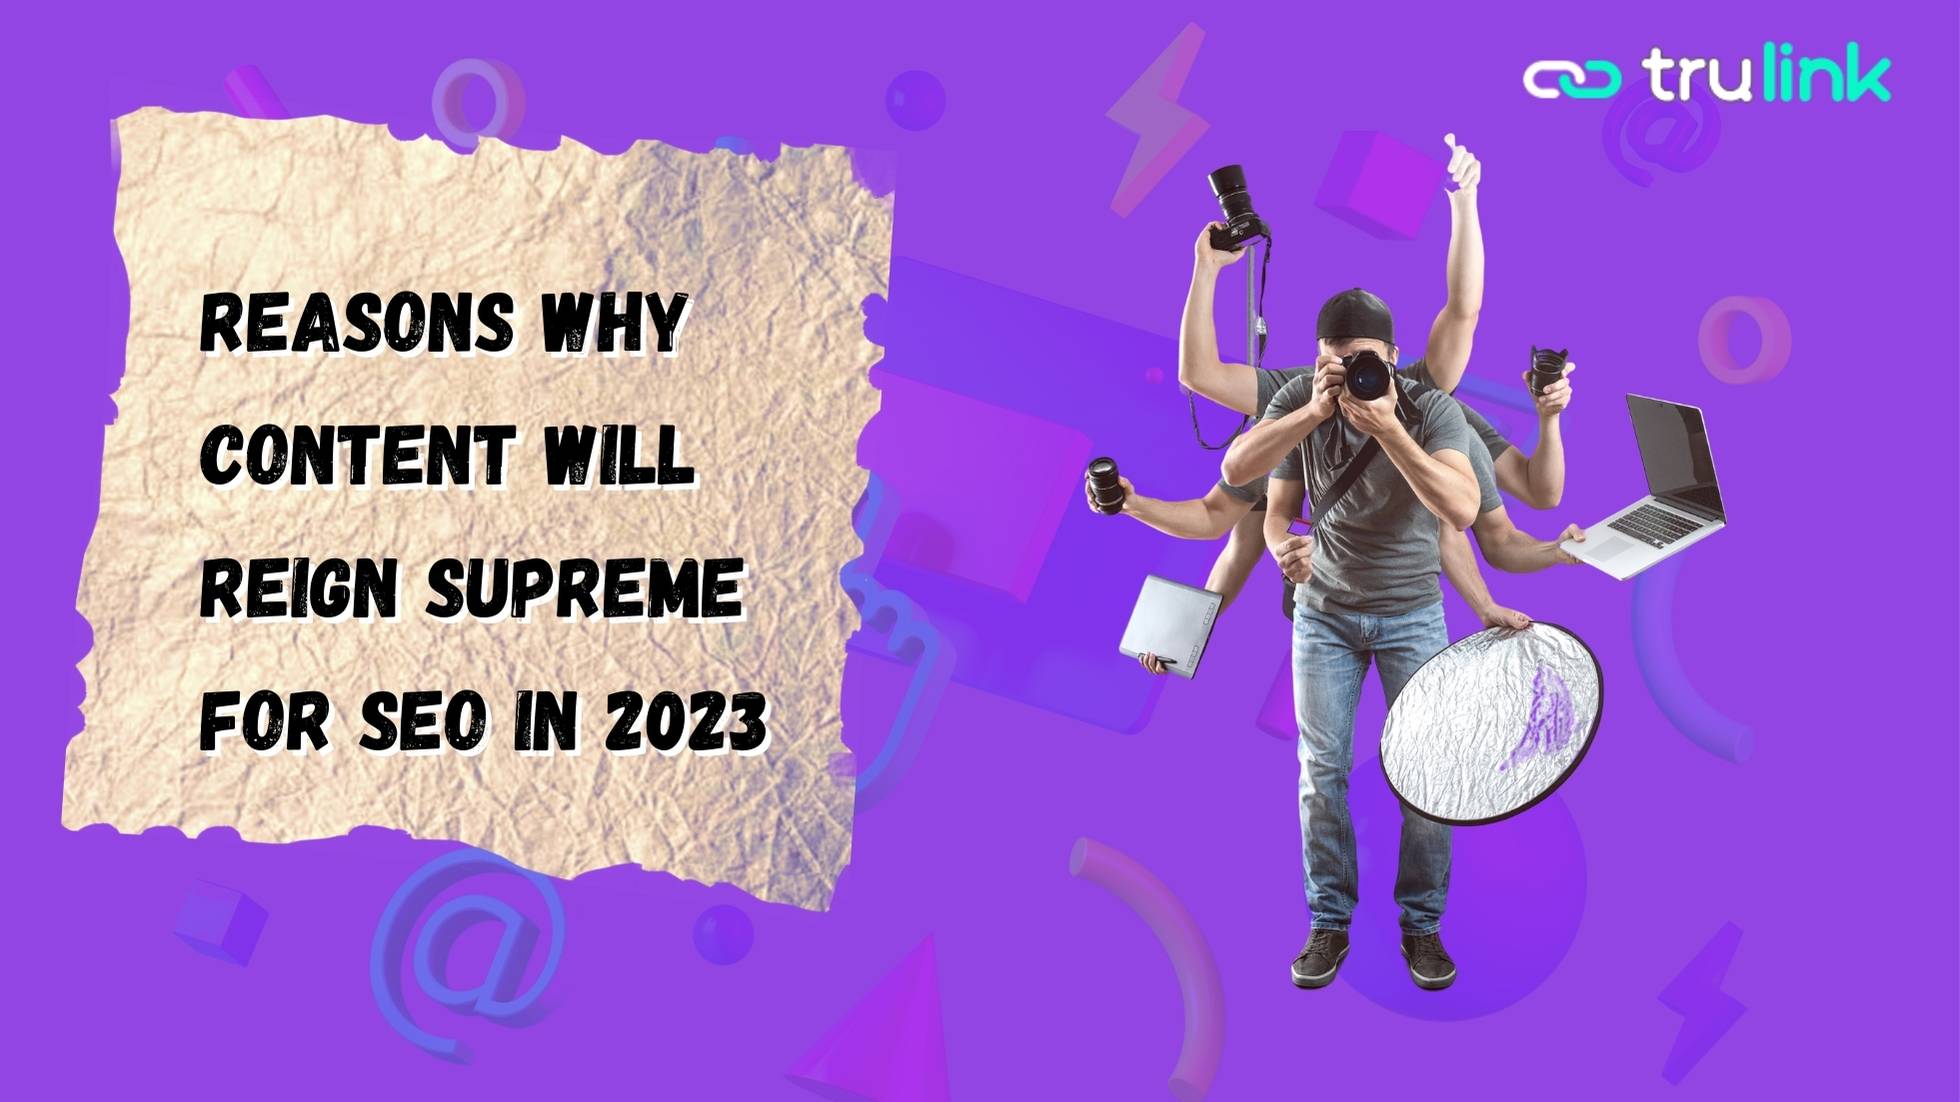 4 reasons why content will reign supreme for SEO in 2023